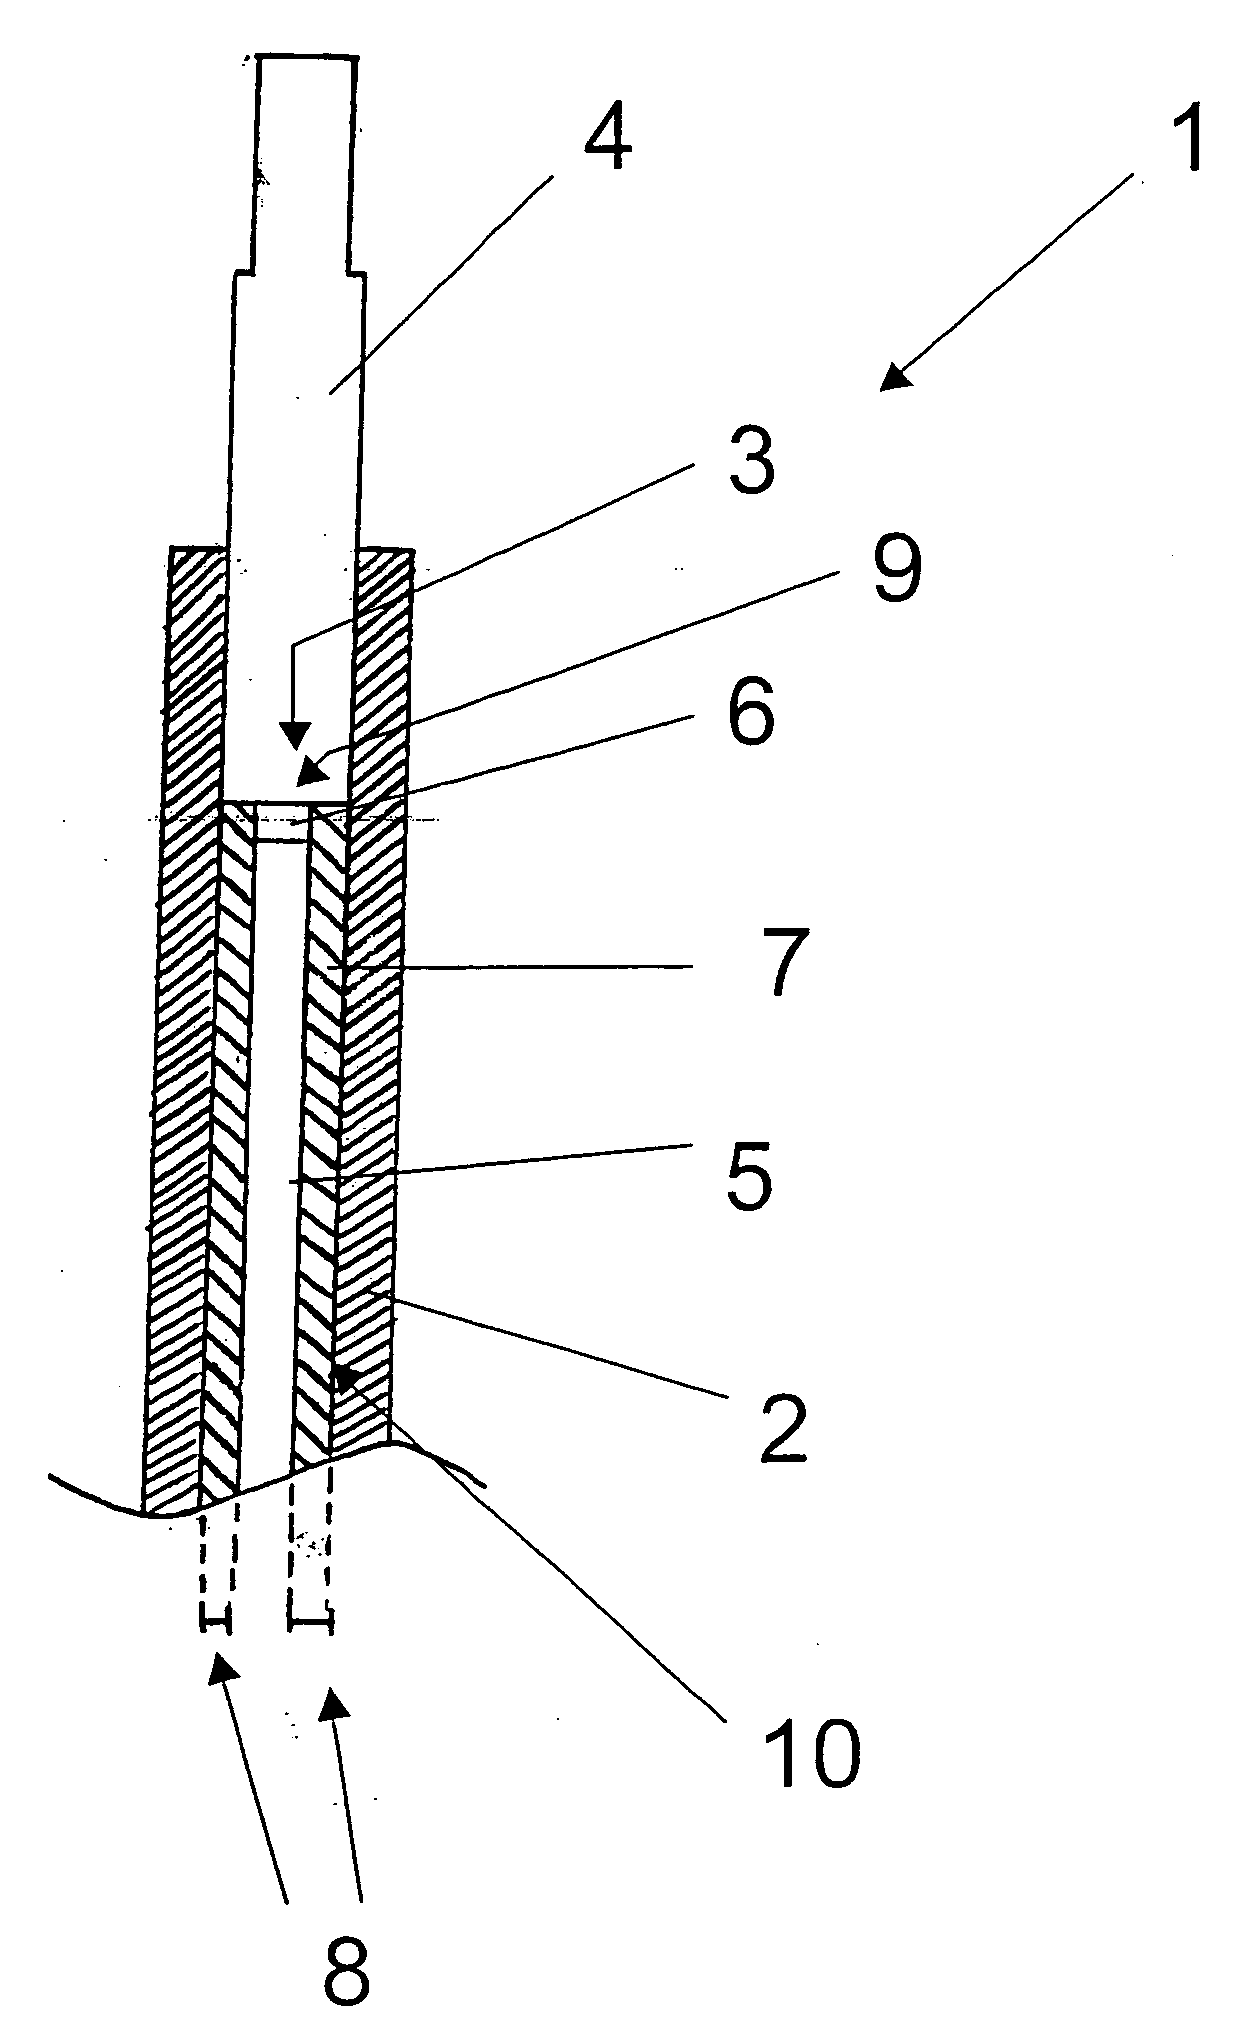 Sheated-element glow plug having a particularly embedded contact element